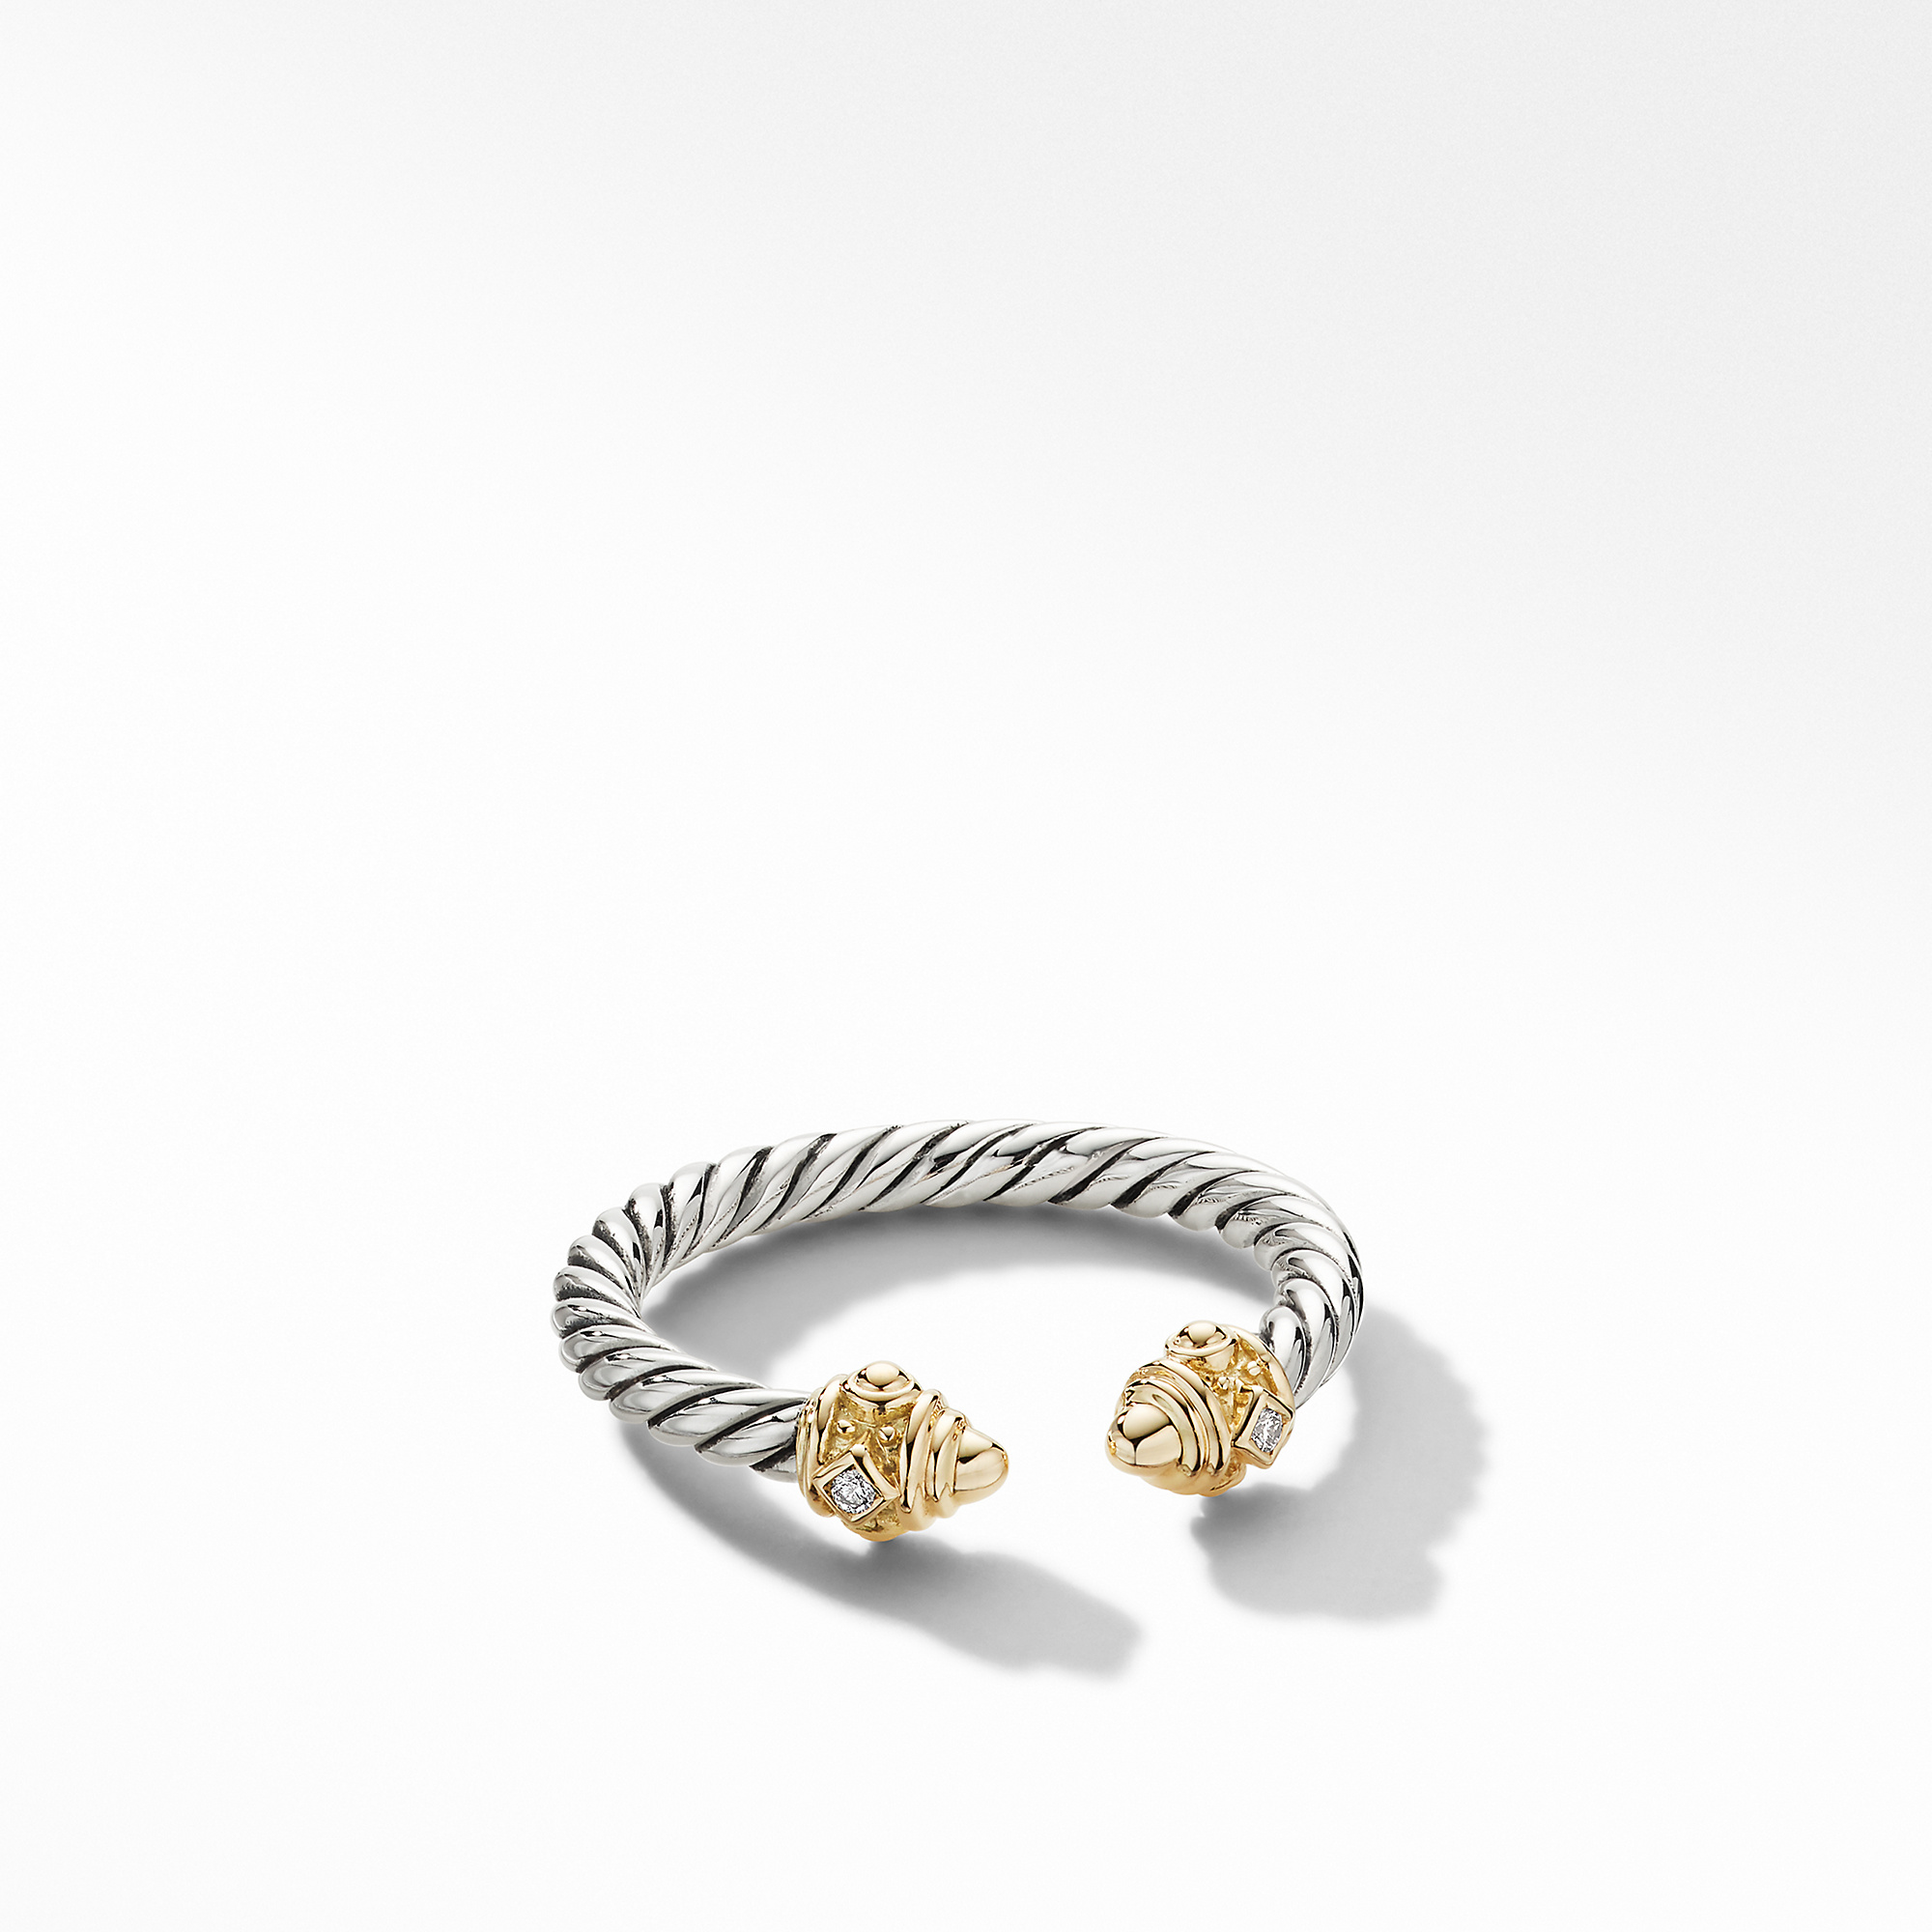 Renaissance Ring in Sterling Silver with 14K Yellow Gold, Gold Domes and Diamonds, 2.3mm